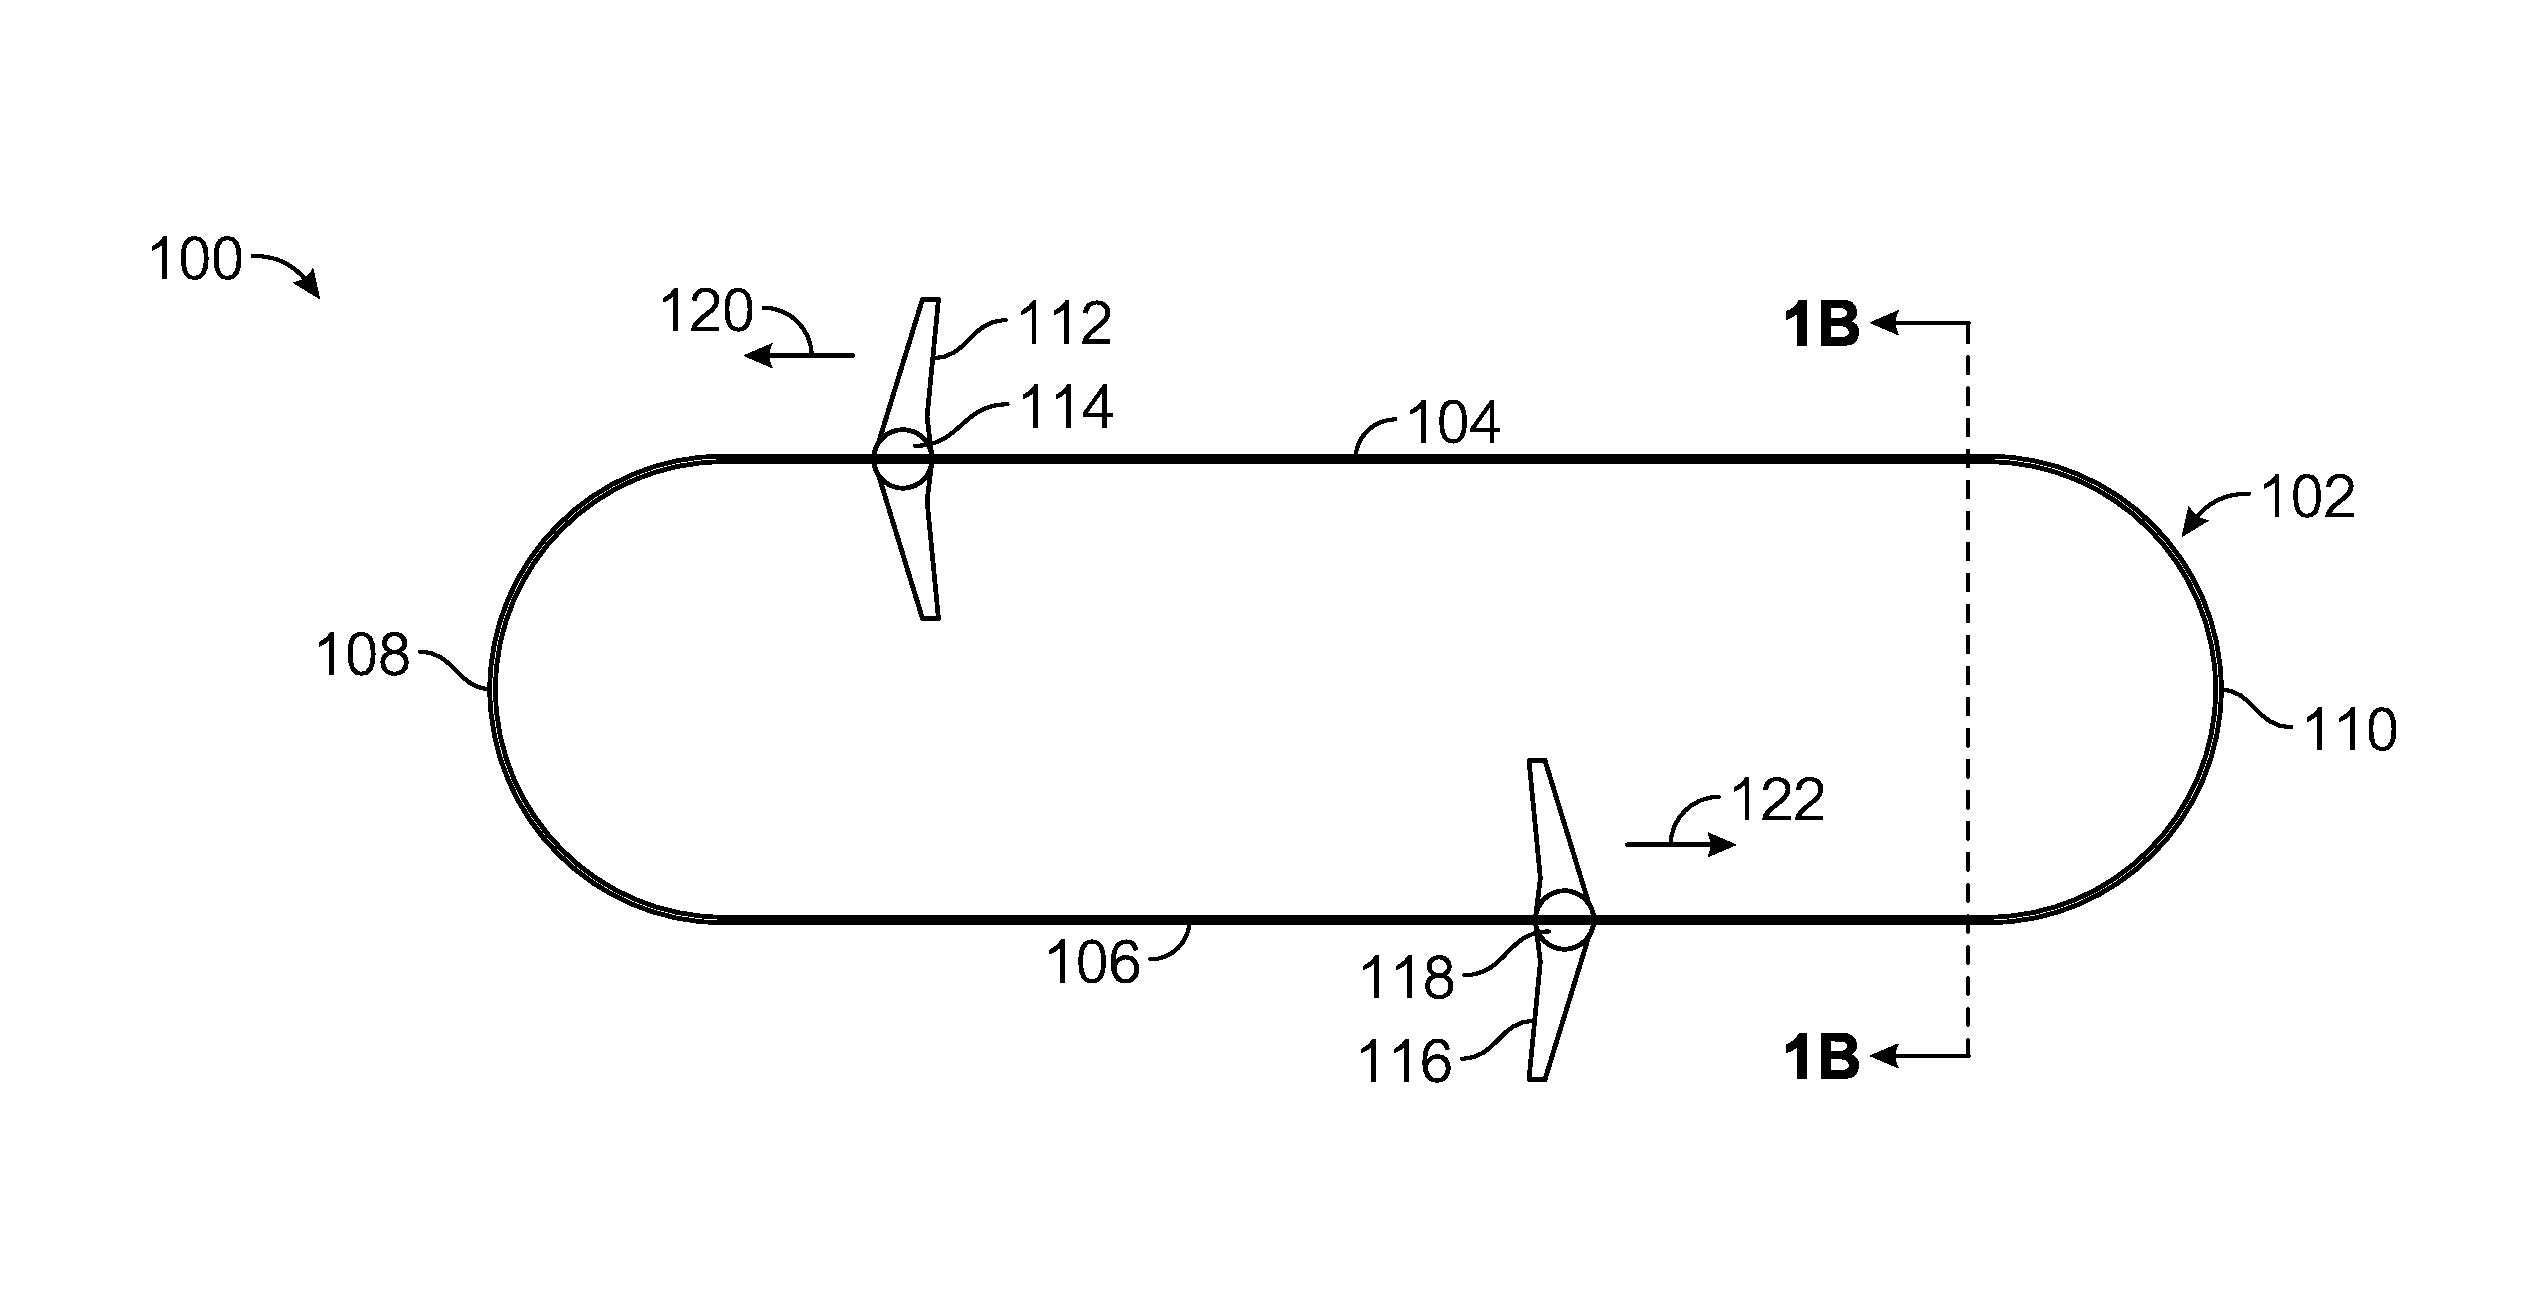 Apparatus for extracting power from fluid flow